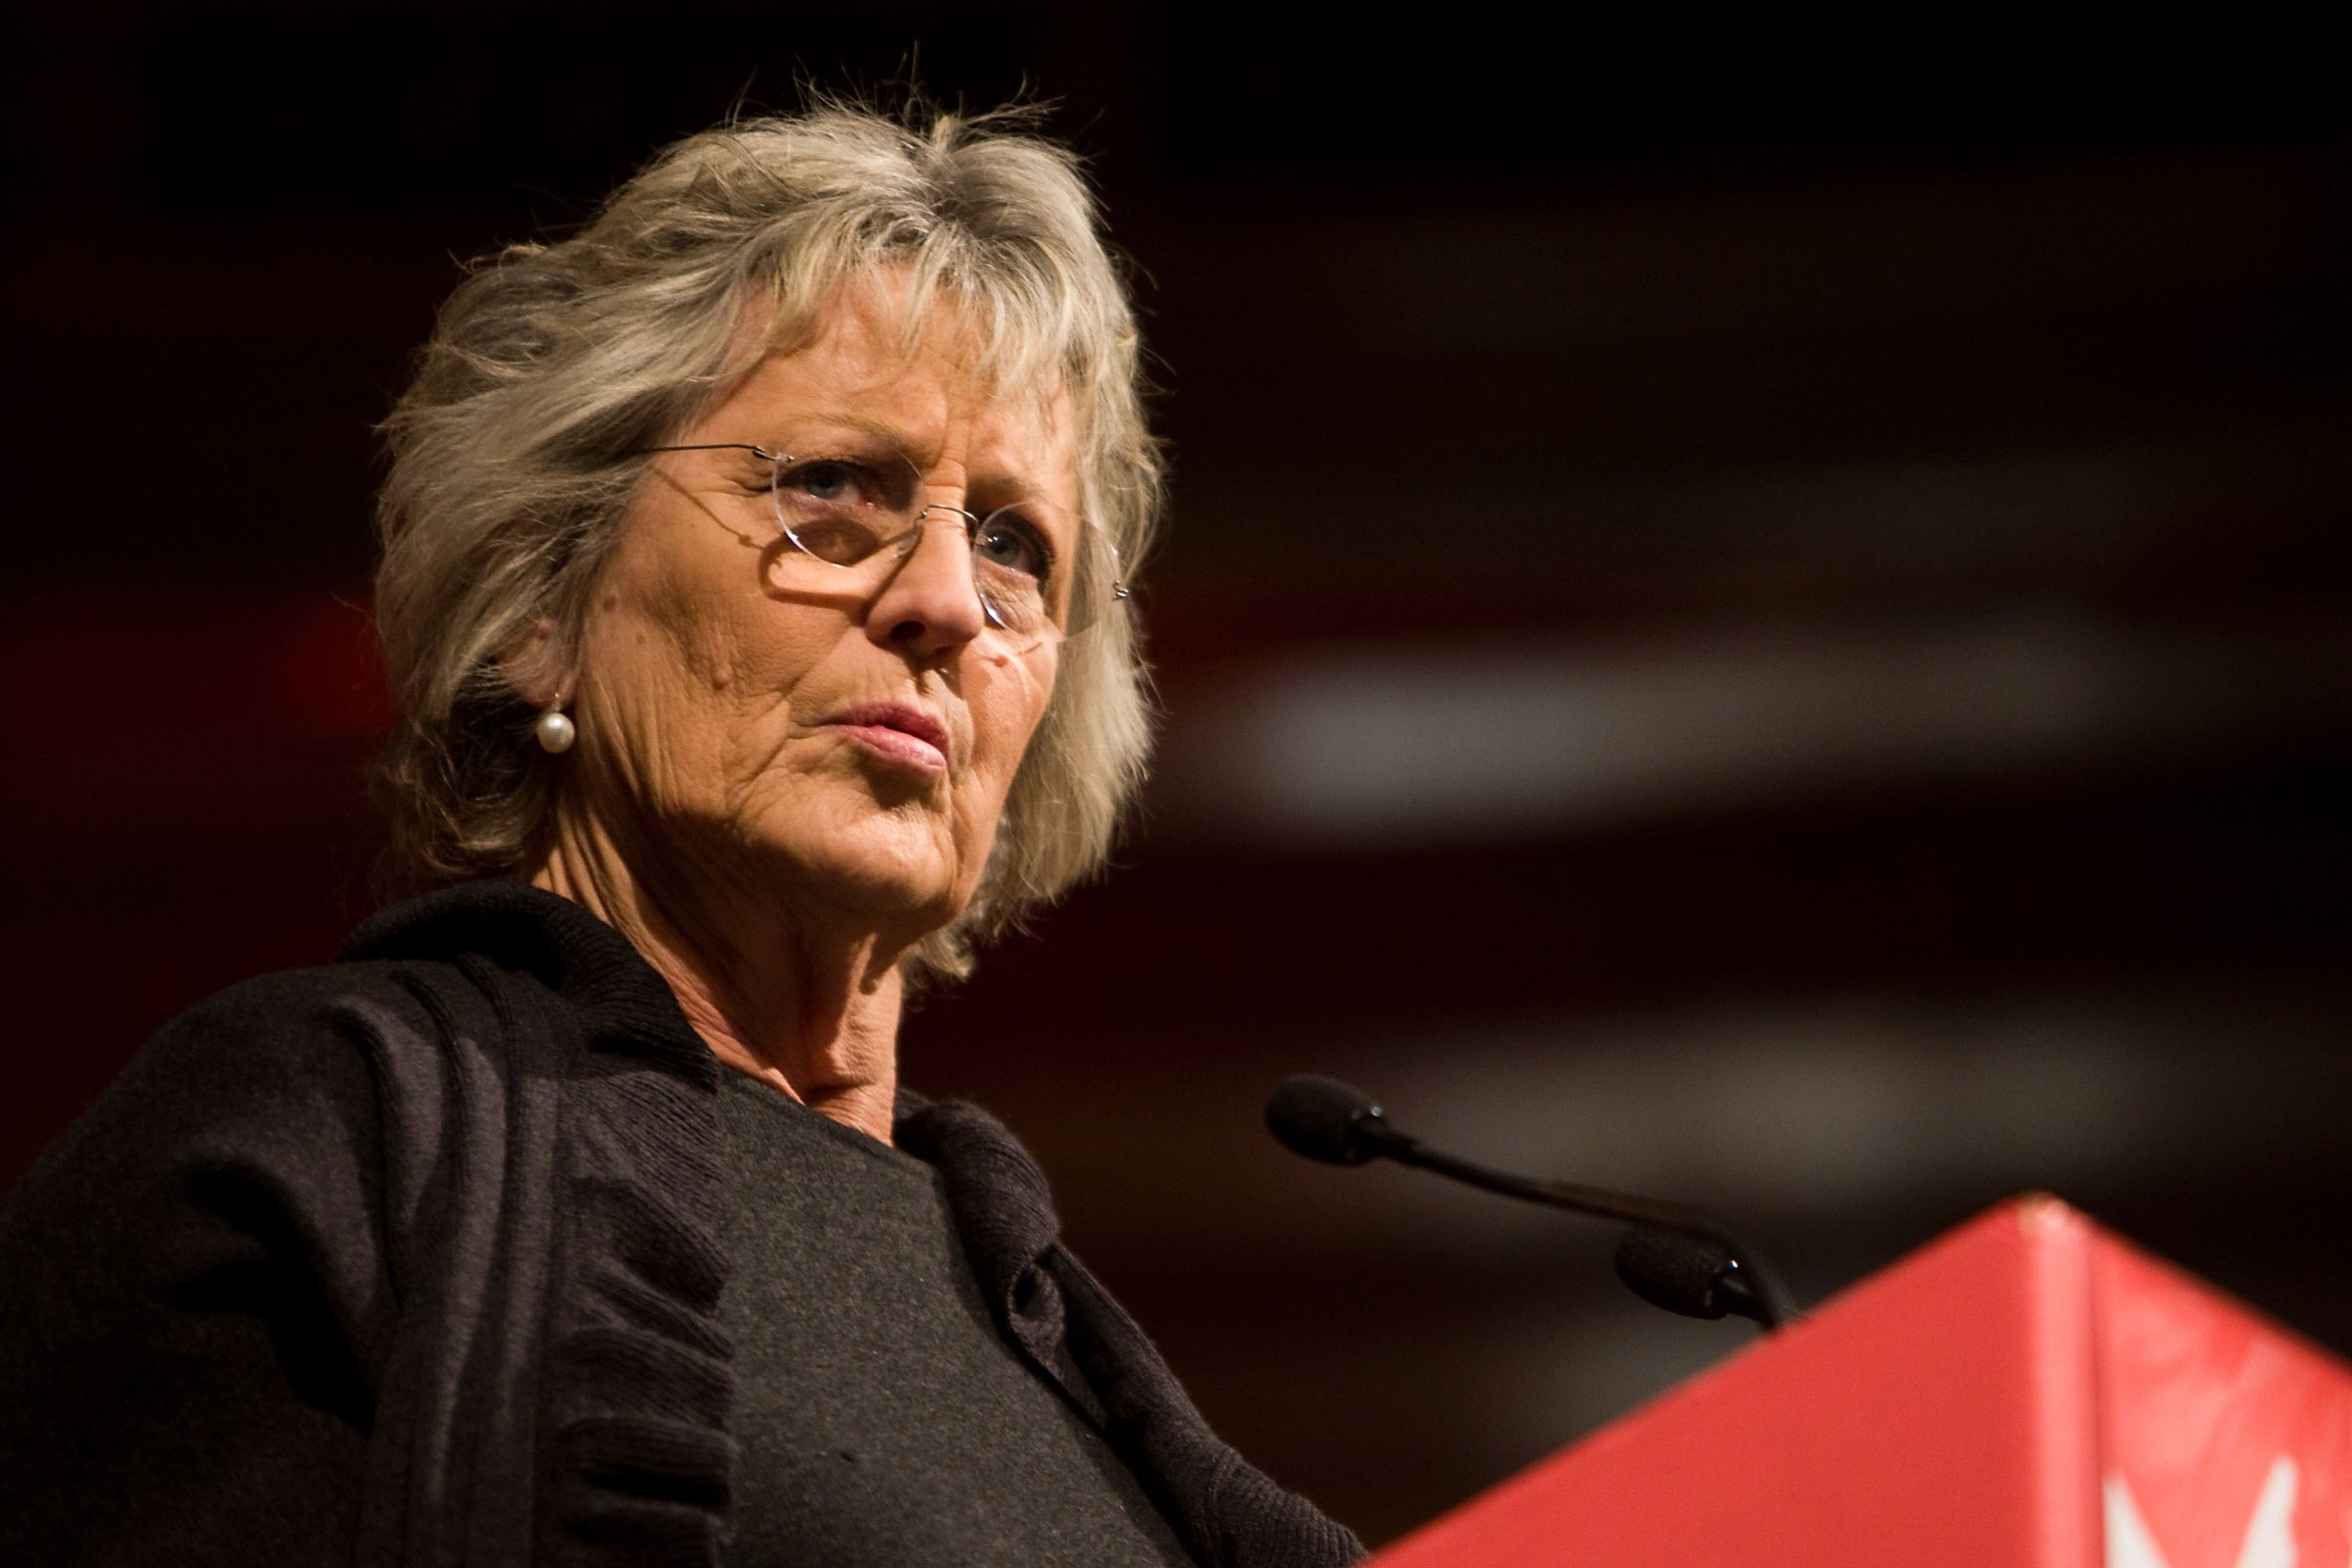 Germaine Greer speaks at The Age Book of the Year Awards as part of the opening night of the Melbourne Writers Festival on August 22, 2008 in Melbourne, Australia.